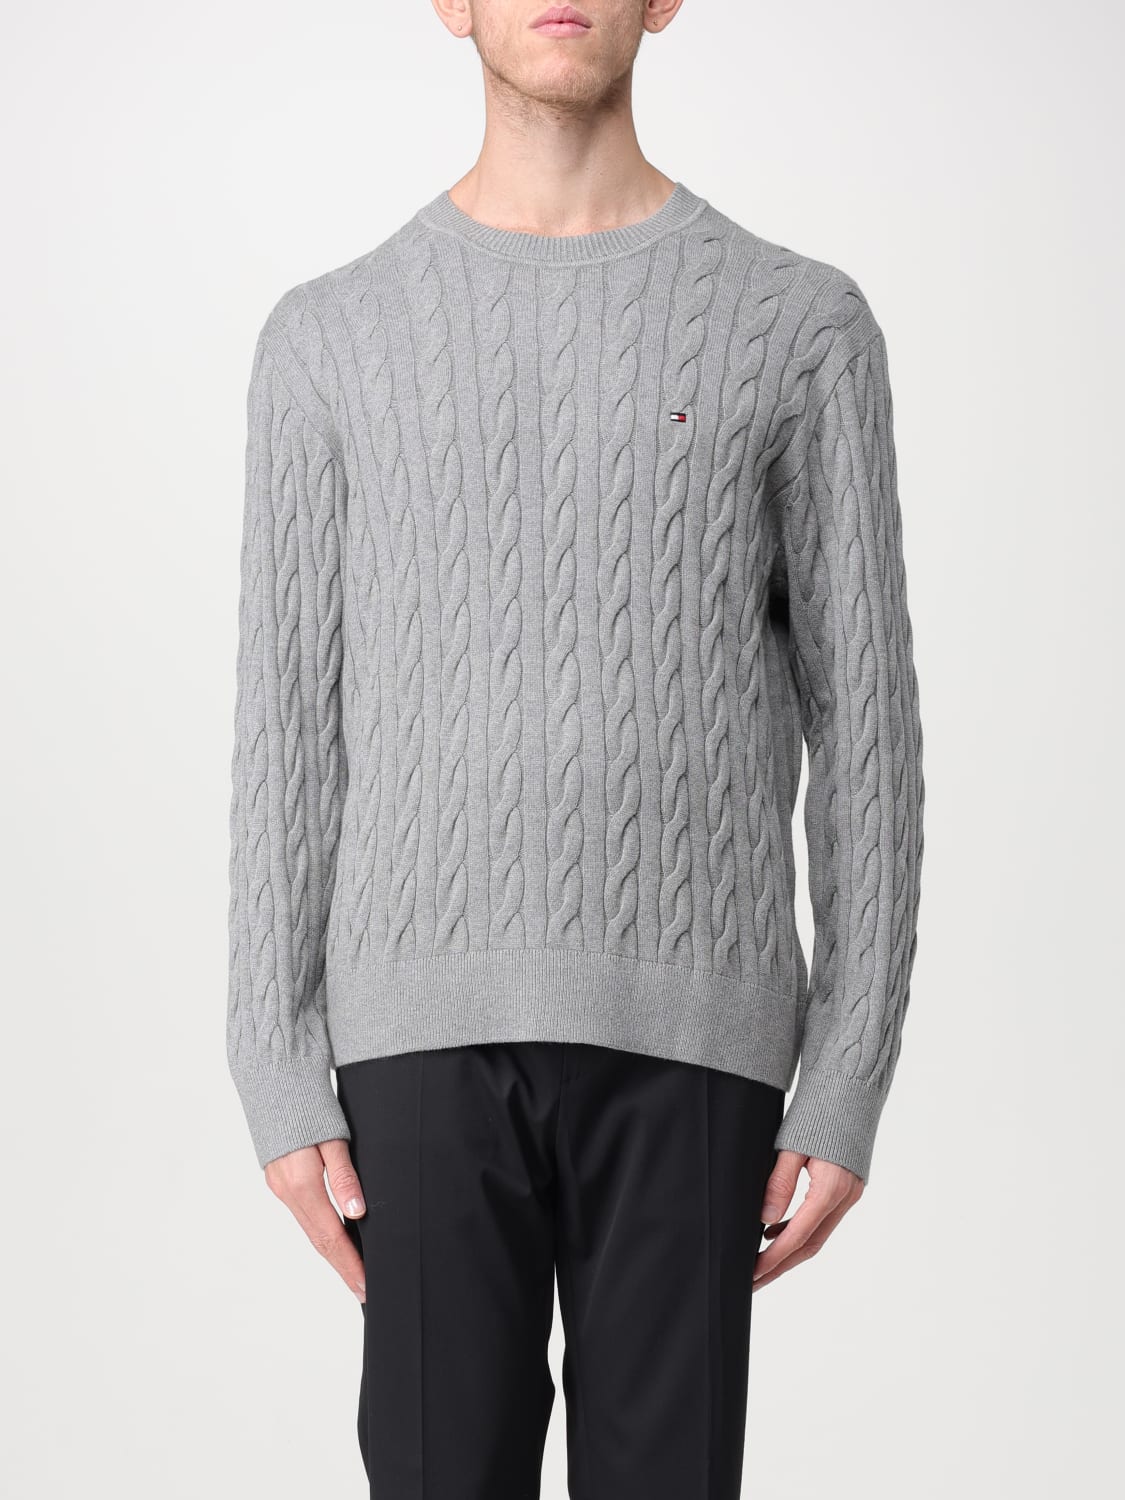 TOMMY HILFIGER: Pull homme - Gris  Pull Tommy Hilfiger MW0MW33132